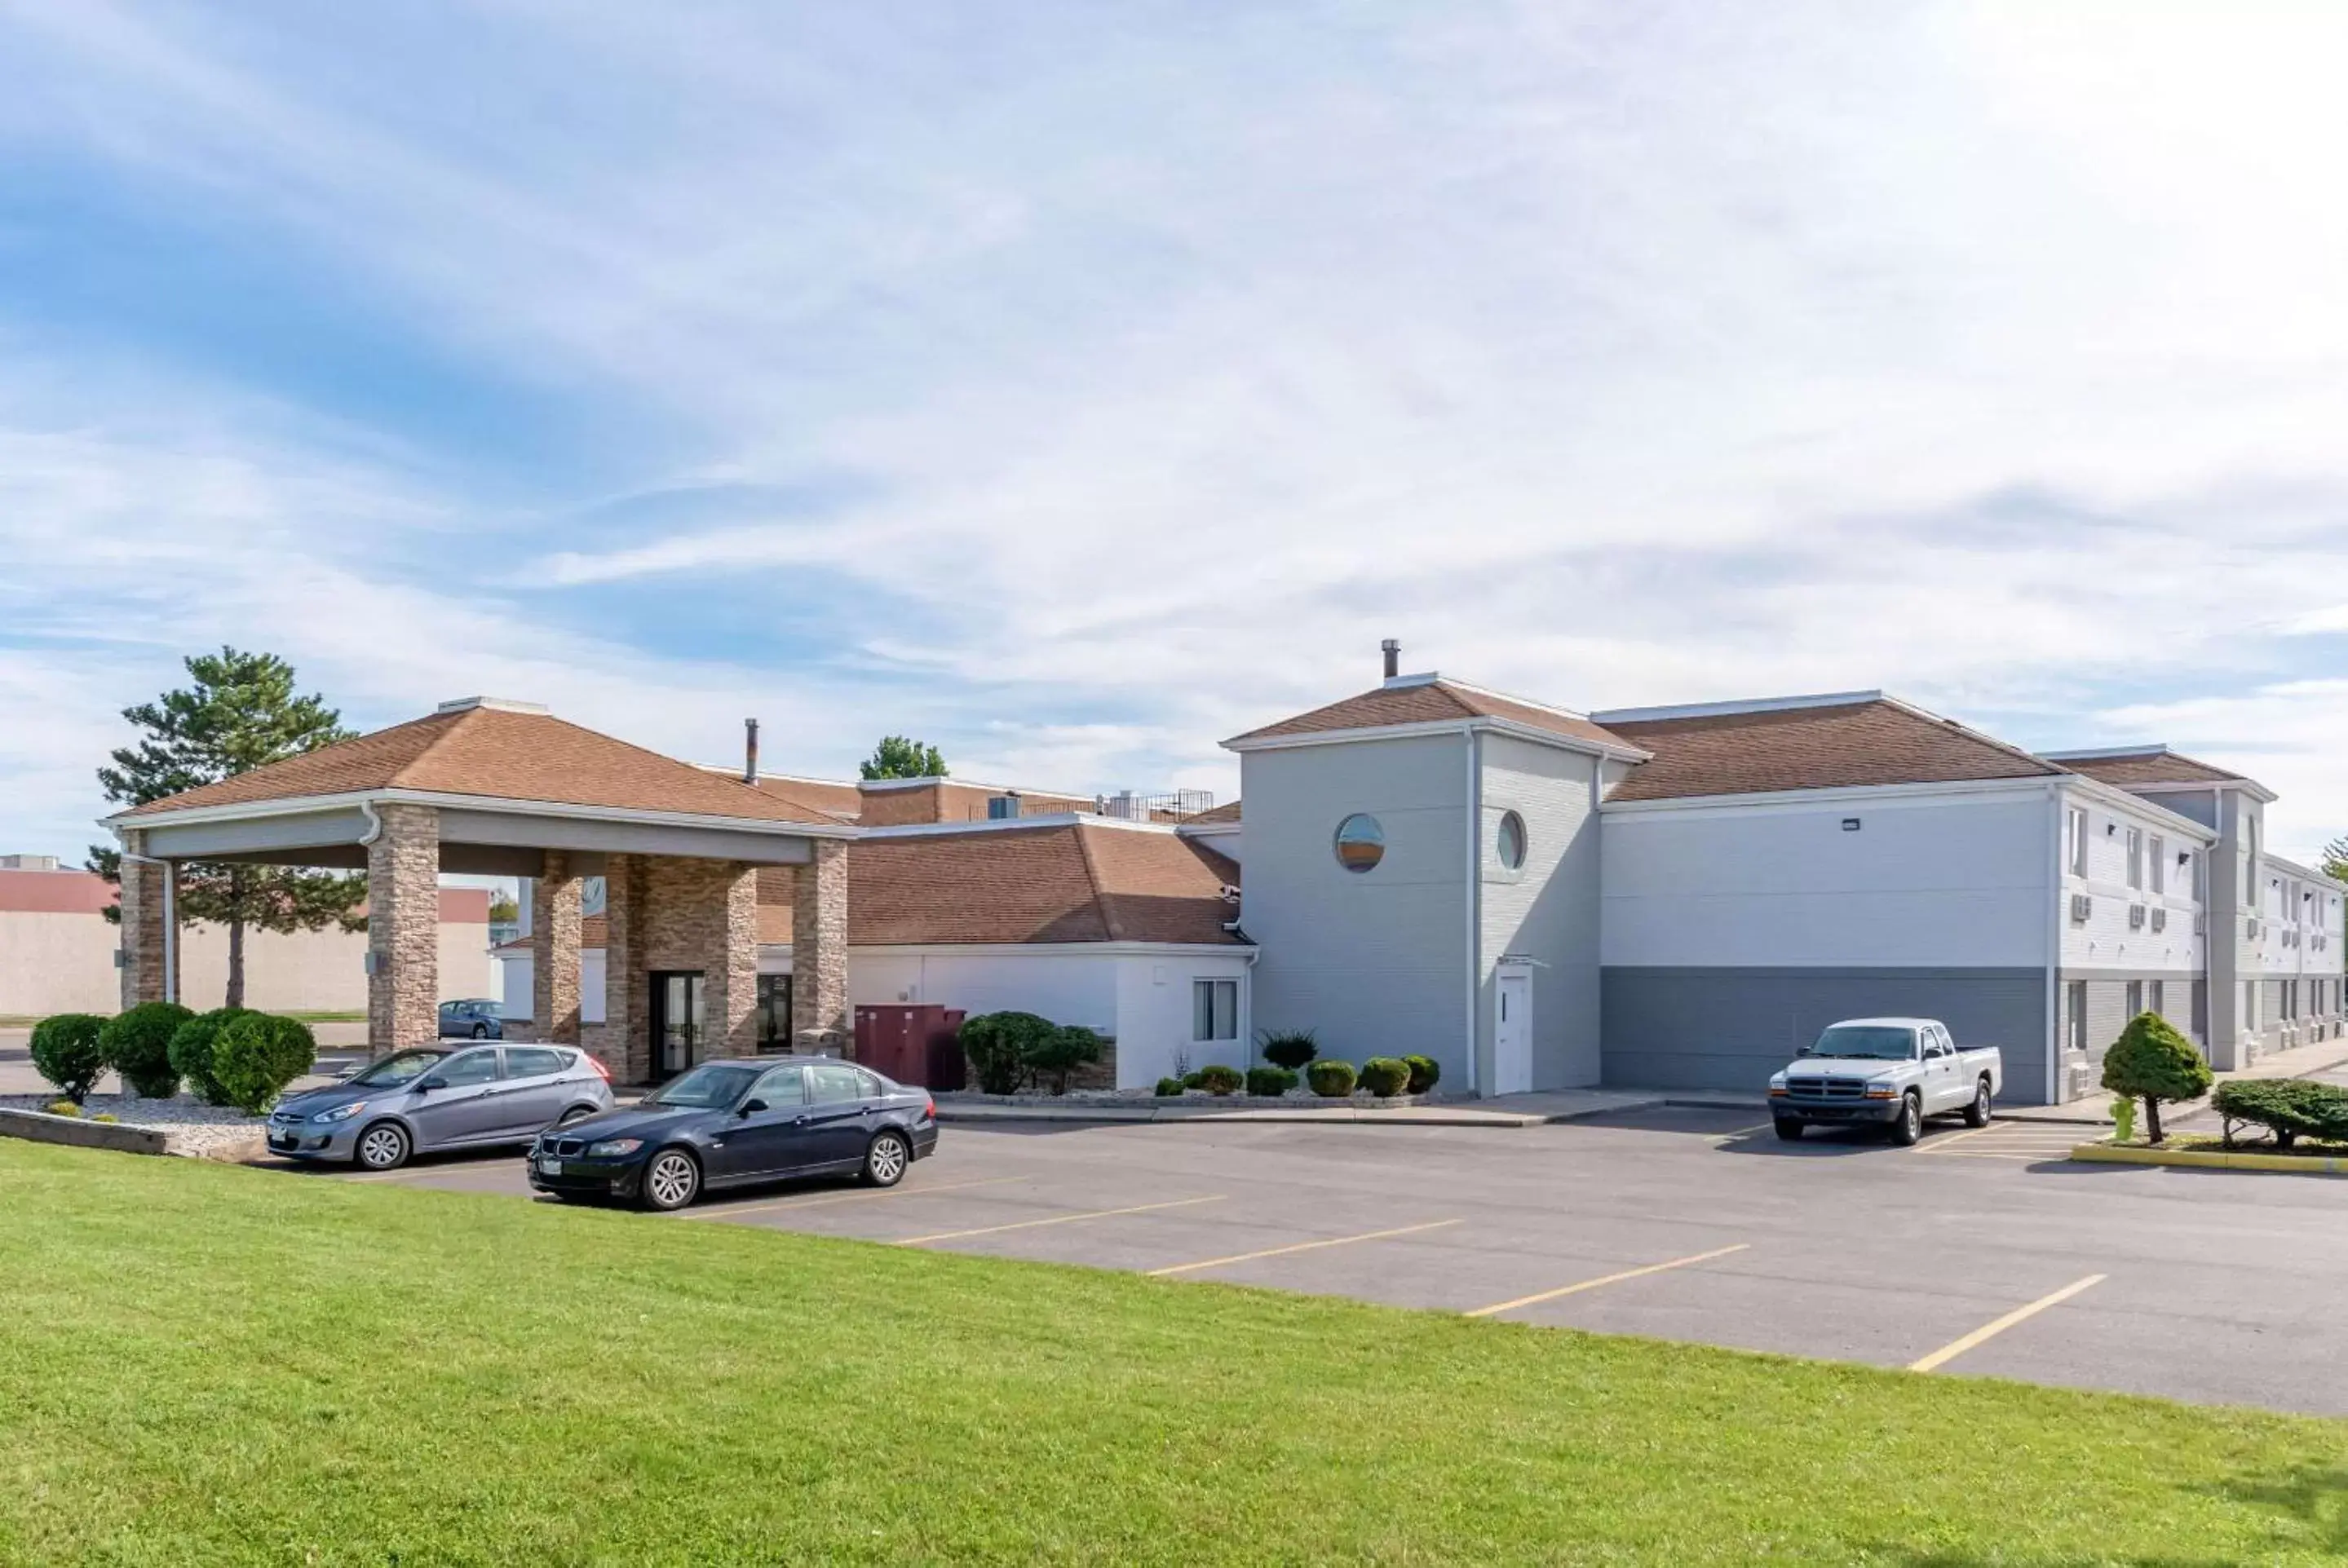 Property Building in Quality Inn - Fairborn